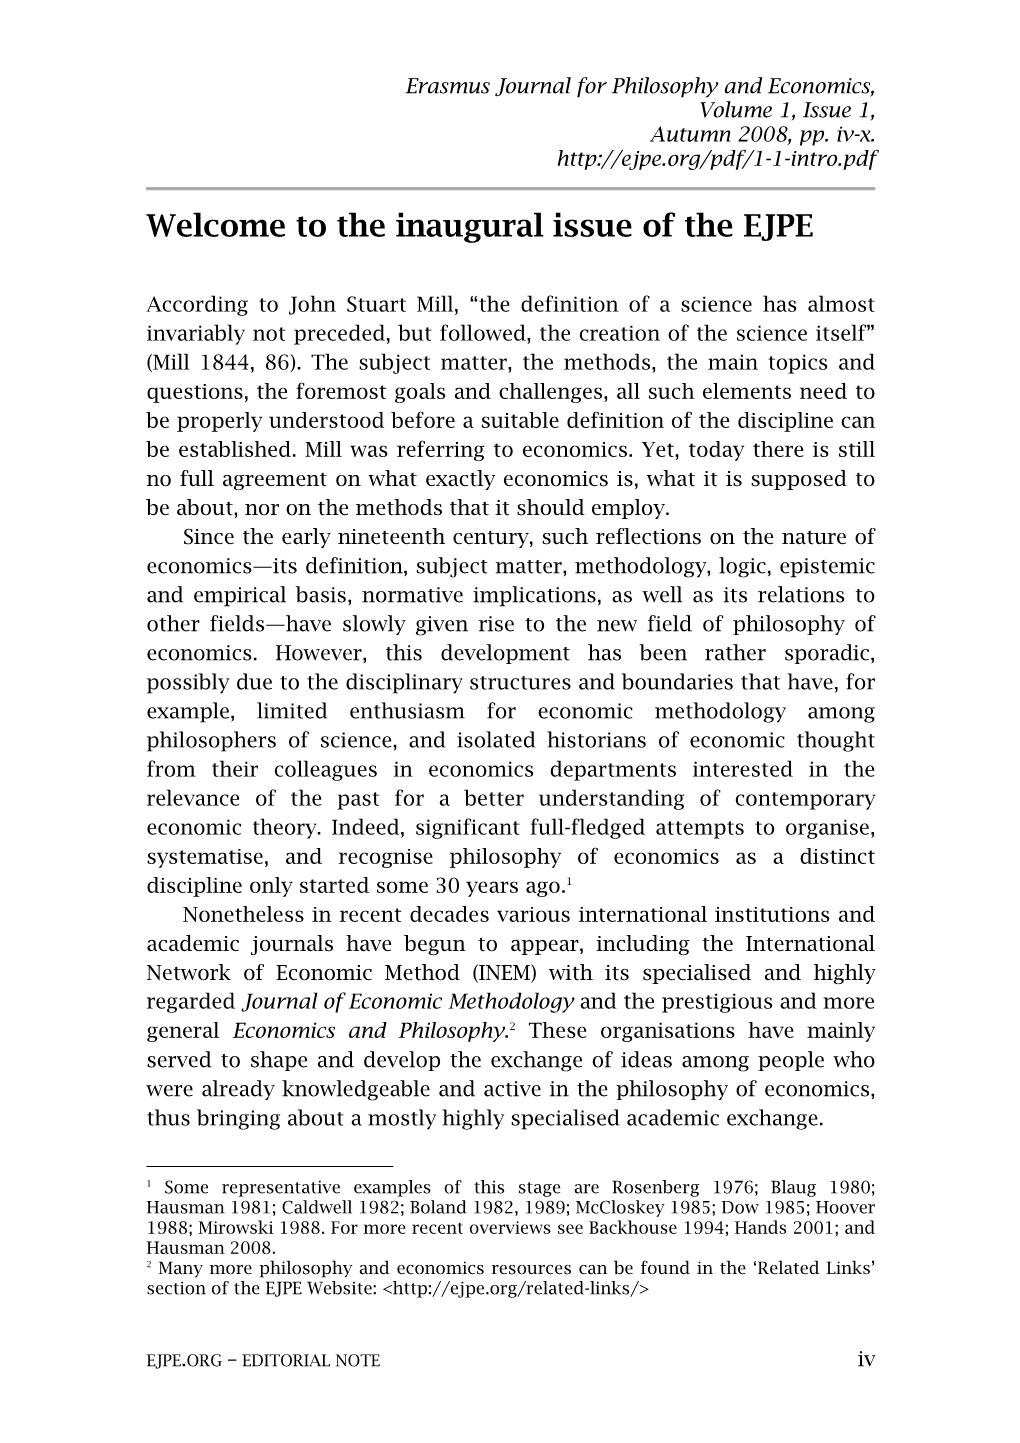 The Inaugural Issue of the EJPE